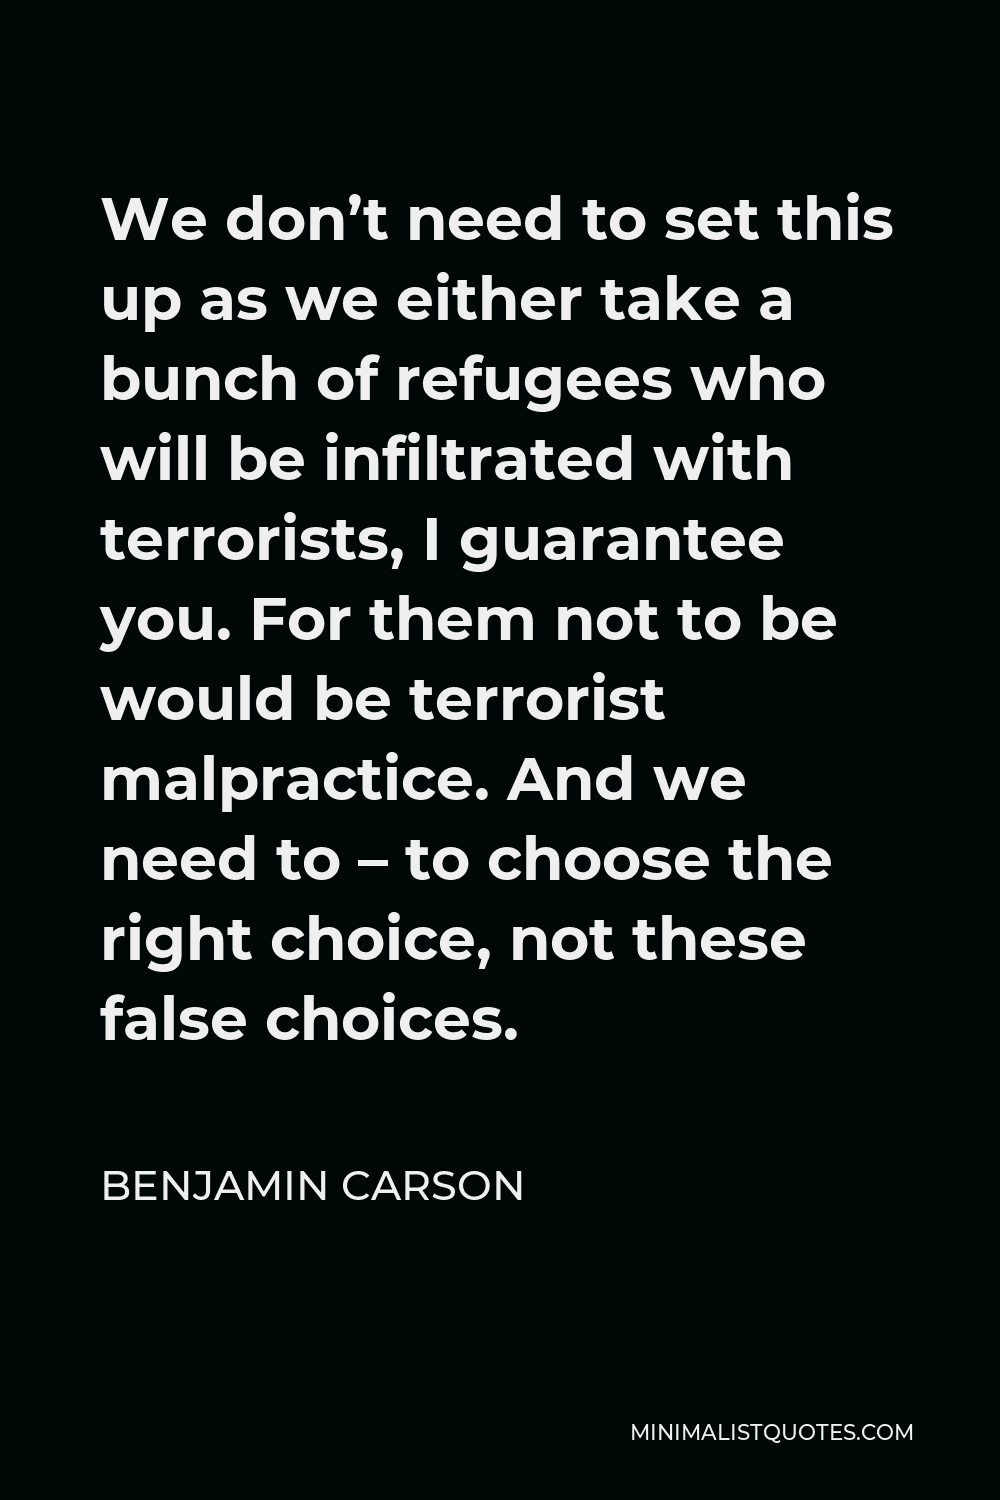 Benjamin Carson Quote - We don’t need to set this up as we either take a bunch of refugees who will be infiltrated with terrorists, I guarantee you. For them not to be would be terrorist malpractice. And we need to – to choose the right choice, not these false choices.